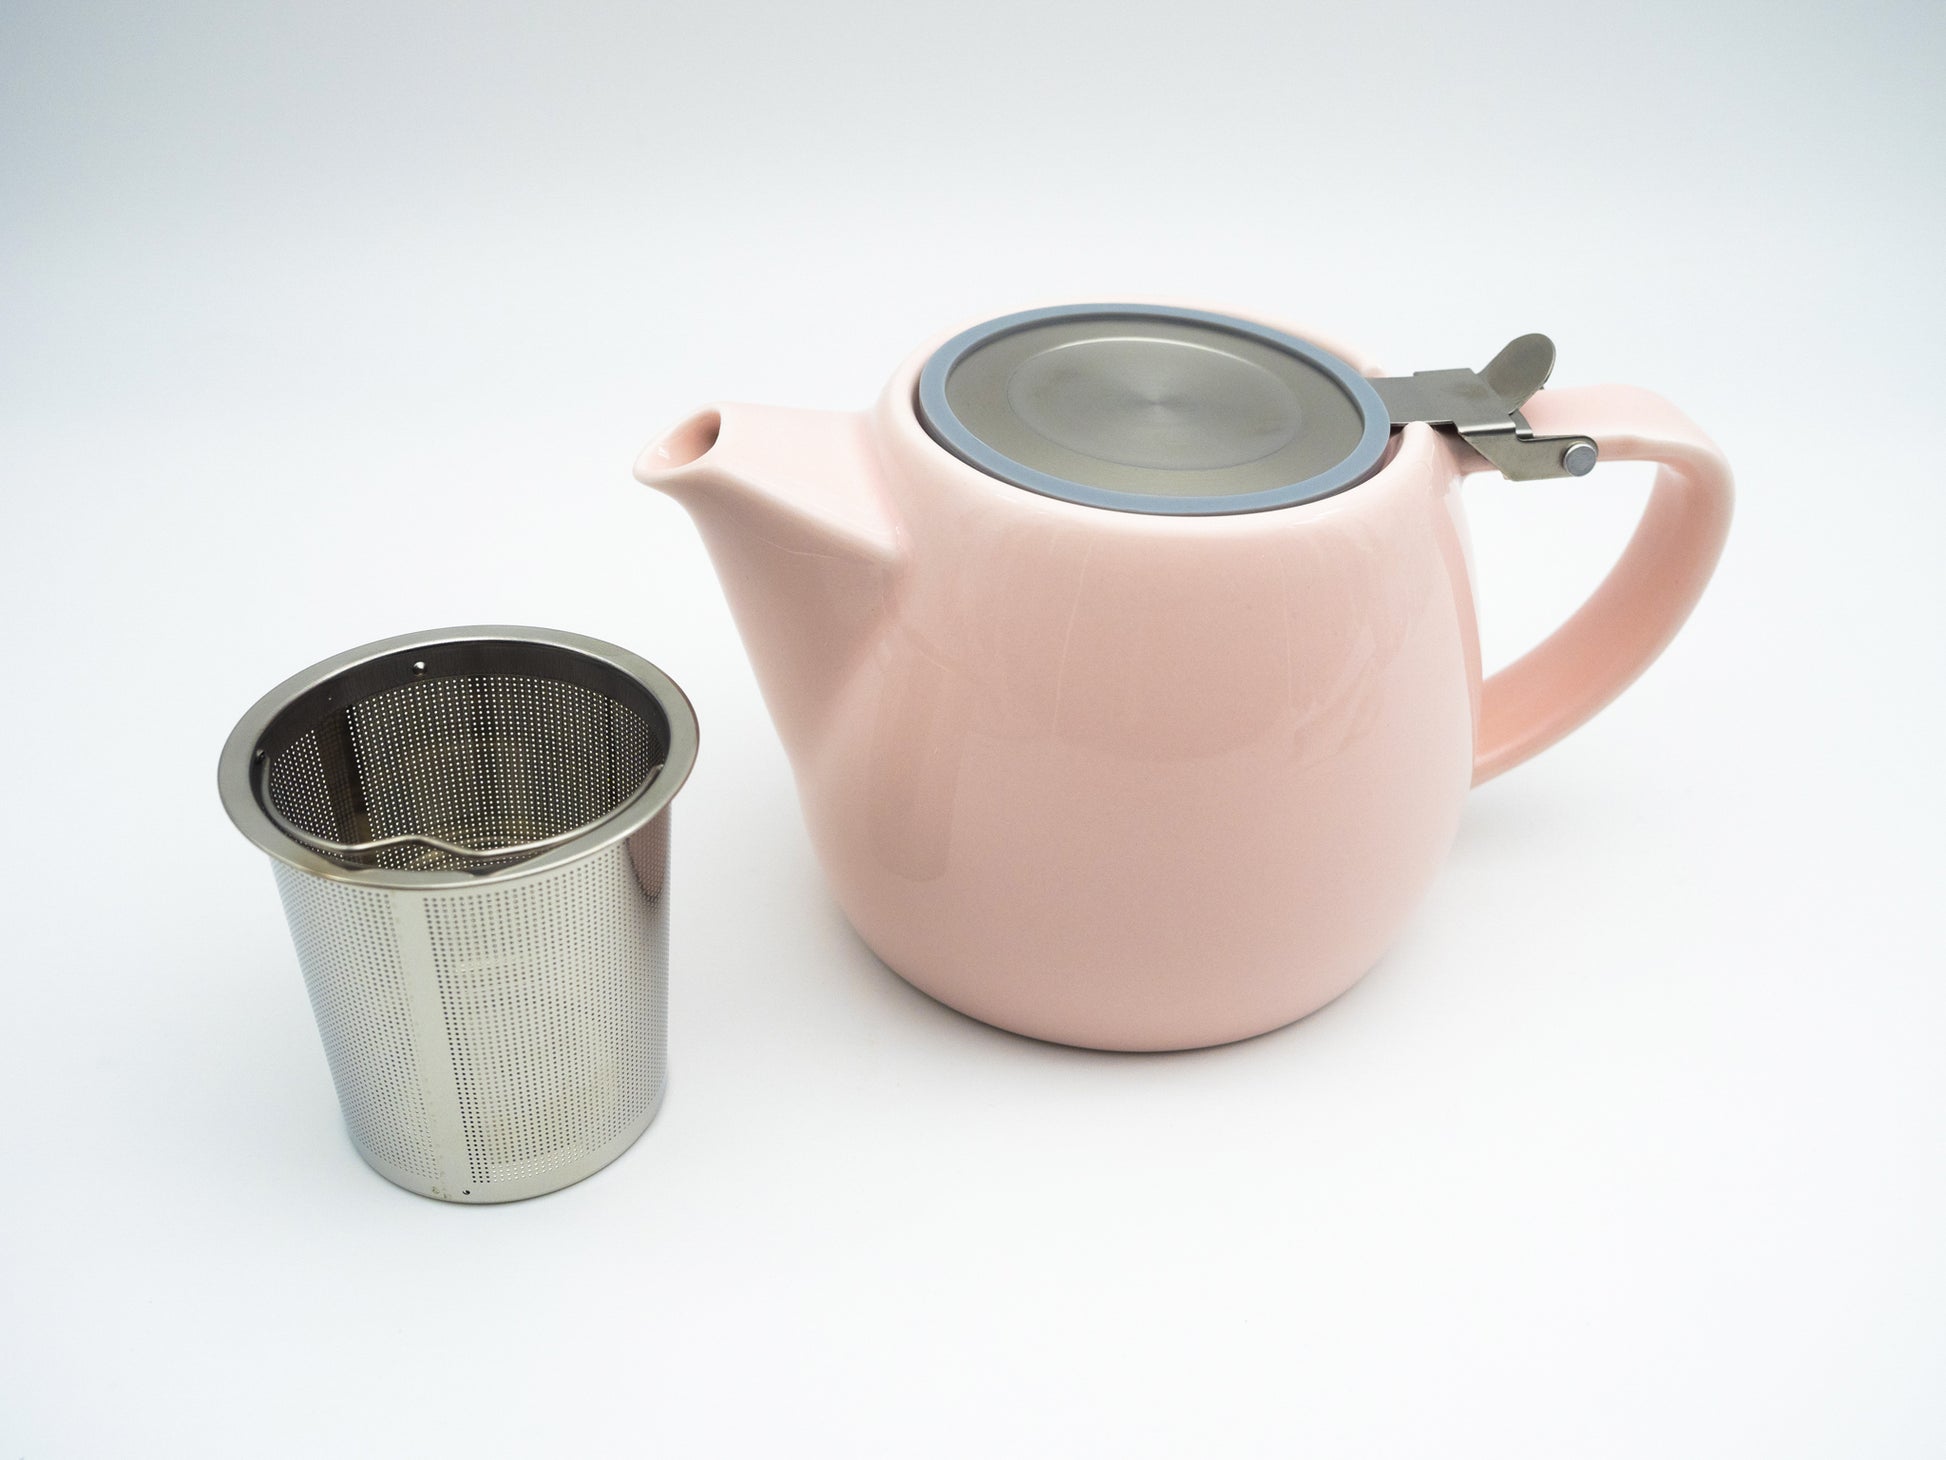 Pink porcelain stump tea pot with stainless steel lid and infuser basket